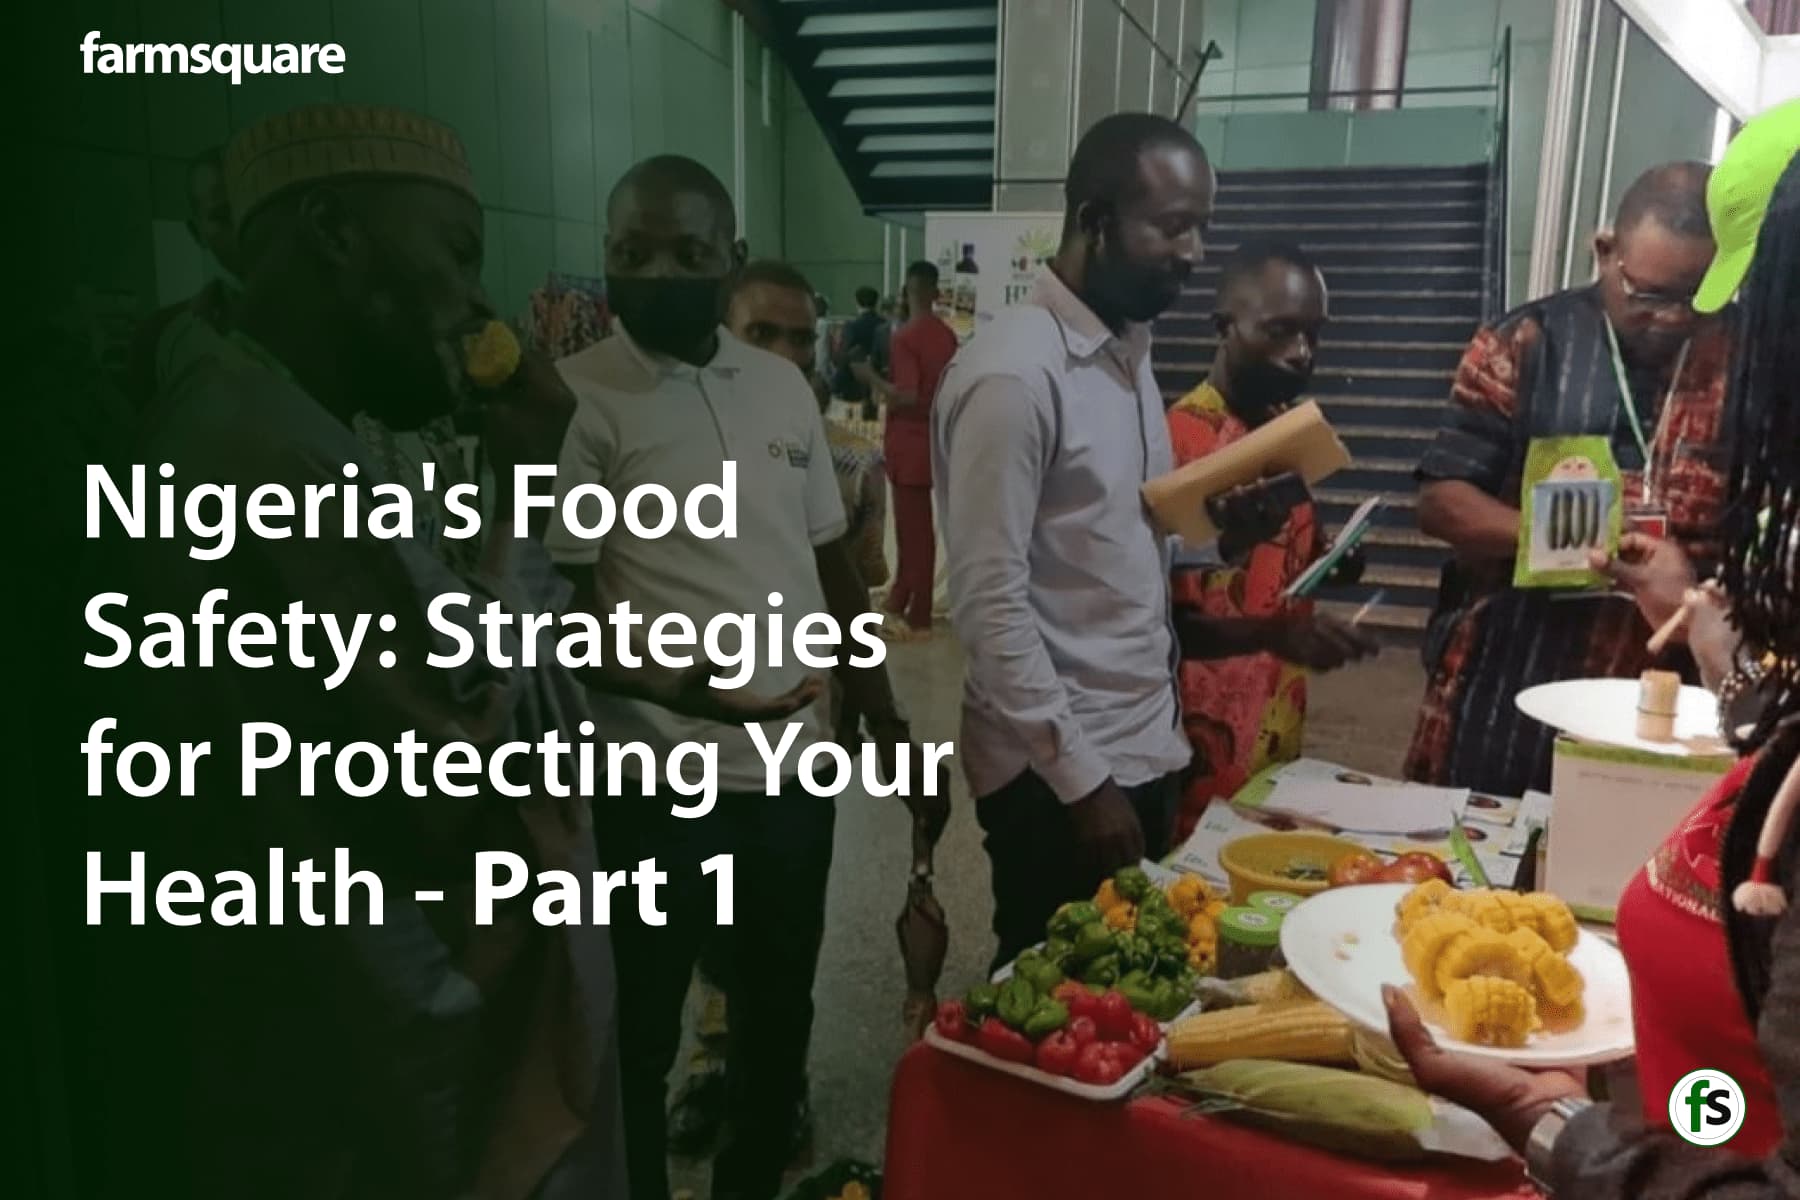 Nigeria's Food Safety: Strategies for Protecting Your Health